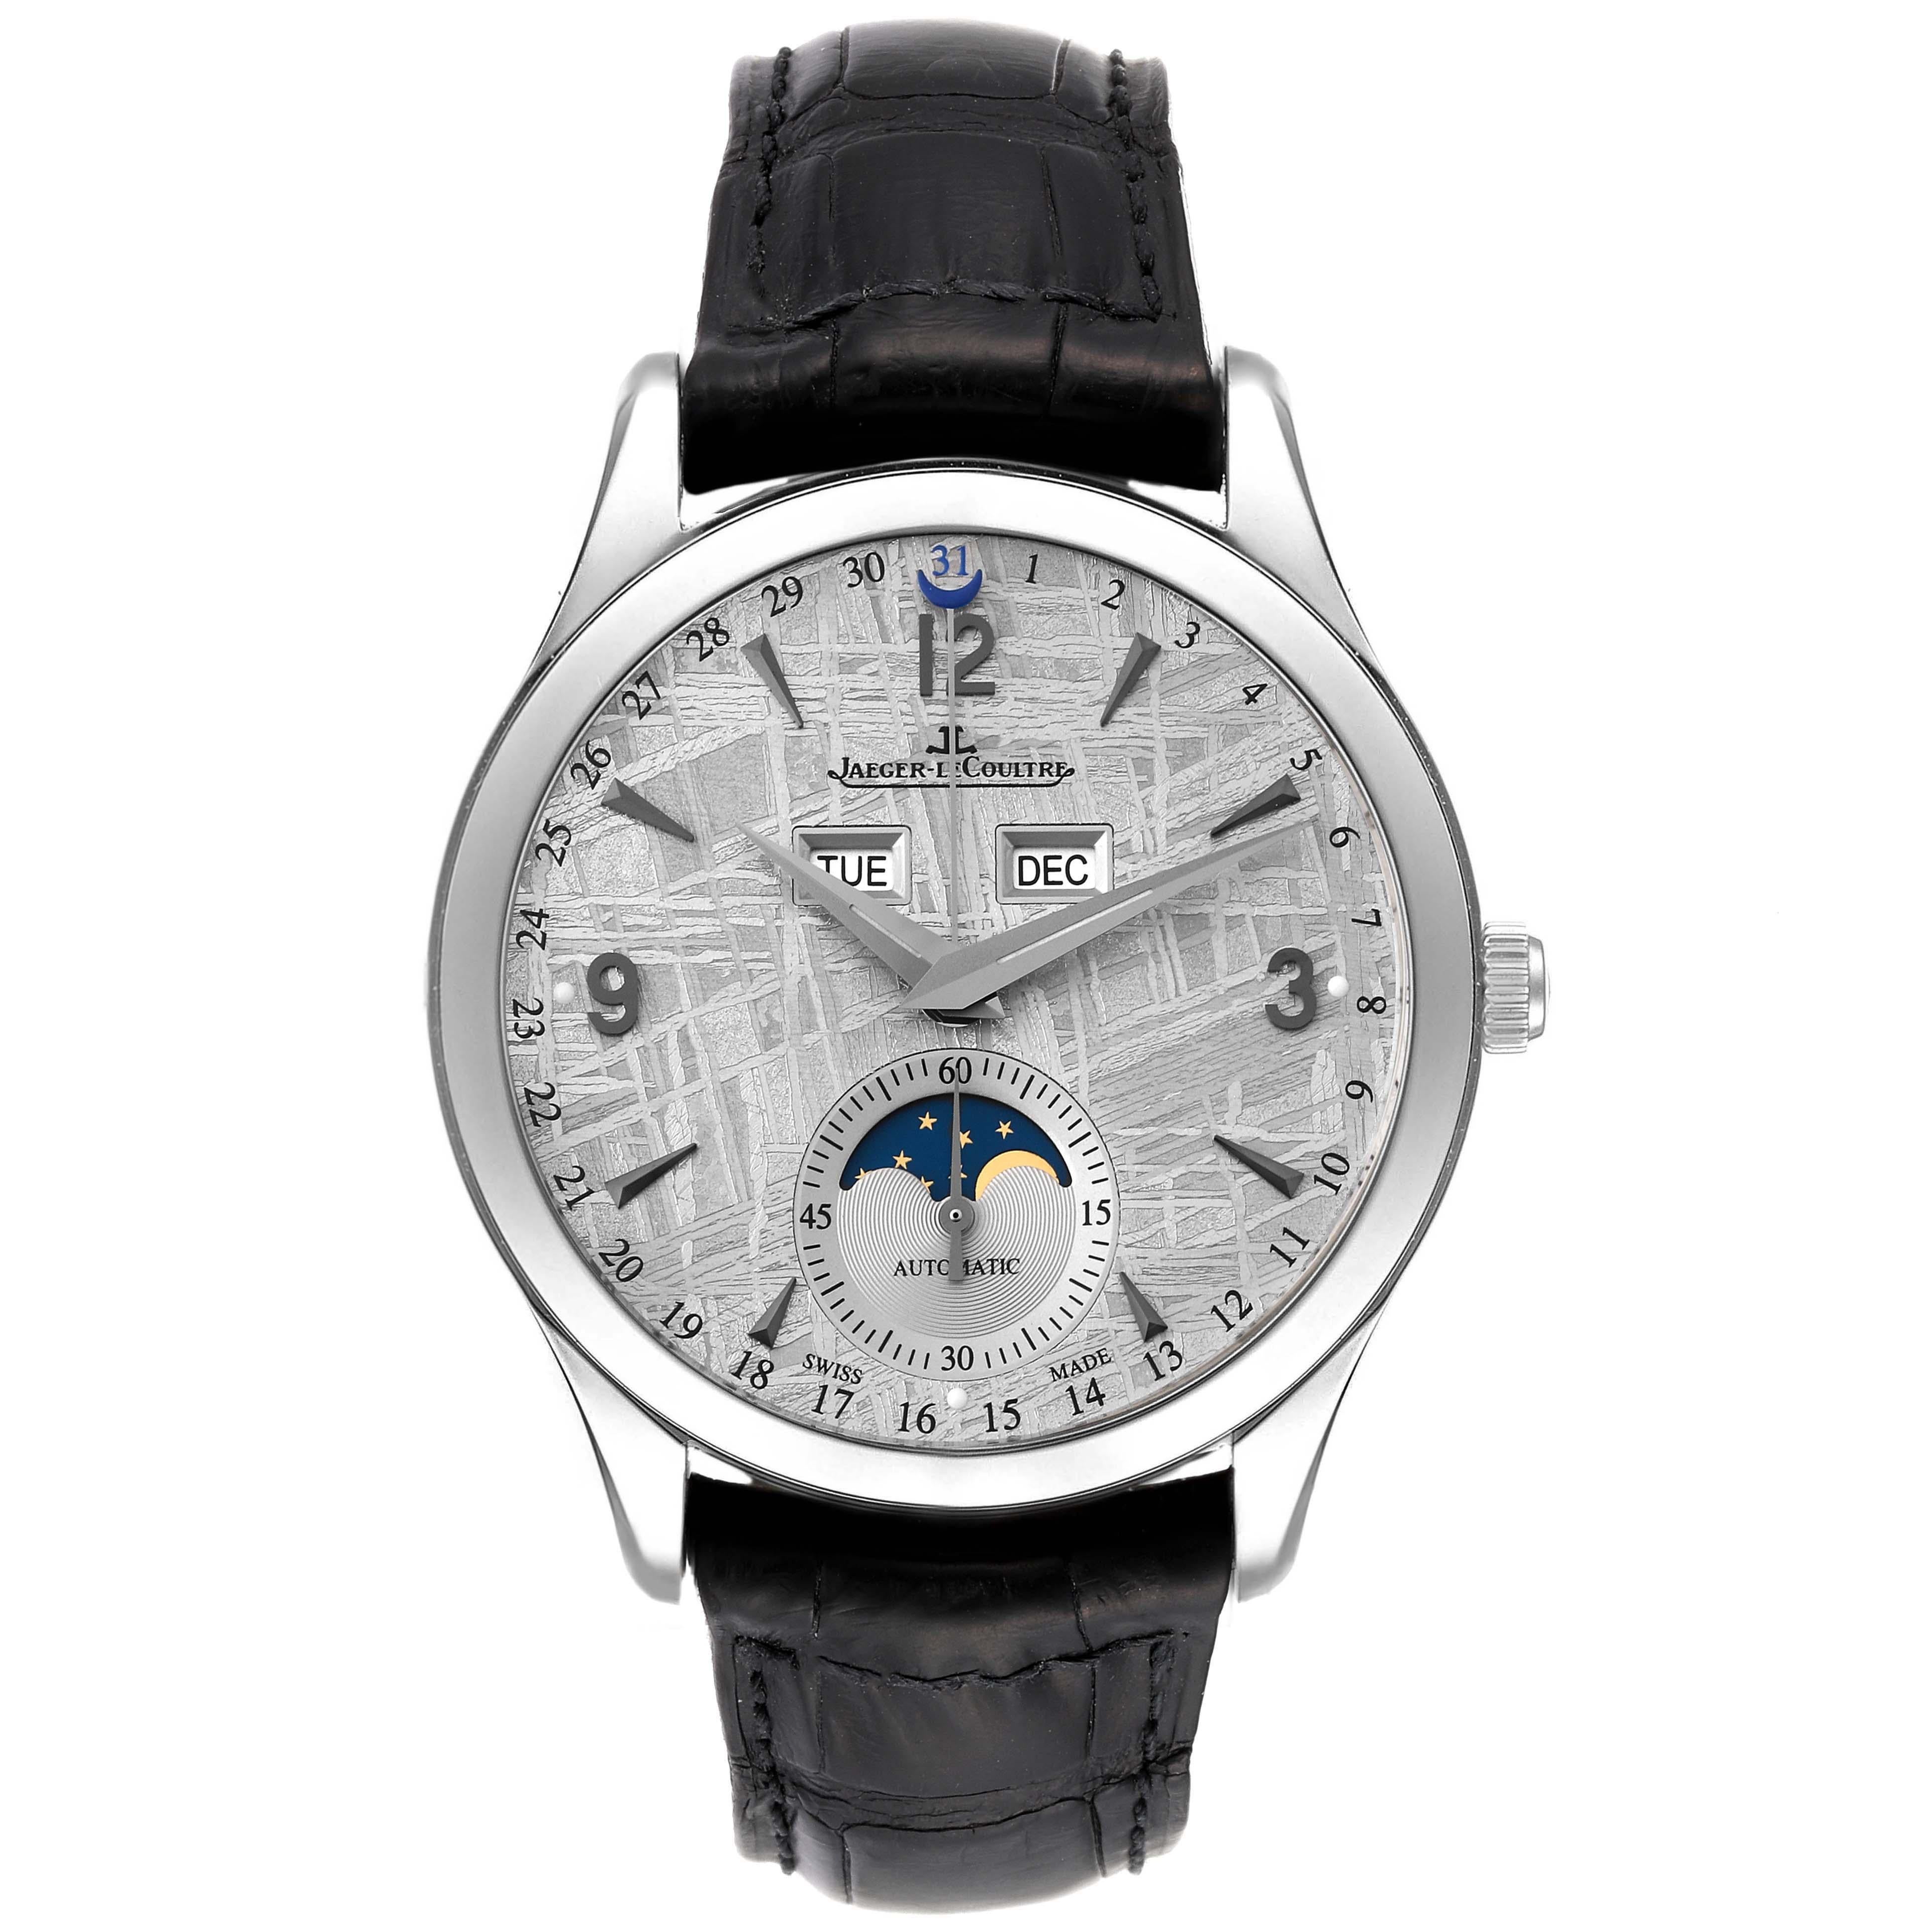 Jaeger LeCoultre Master Calendar Meteorite Dial Steel Mens Watch Q1558421. Self-winding automatic movement. Stainless steel case 39.0 mm in diameter. Case thickness: 10.6 mm. Concave lugs. Transparent exhibition sapphire crystal case back. Stainless